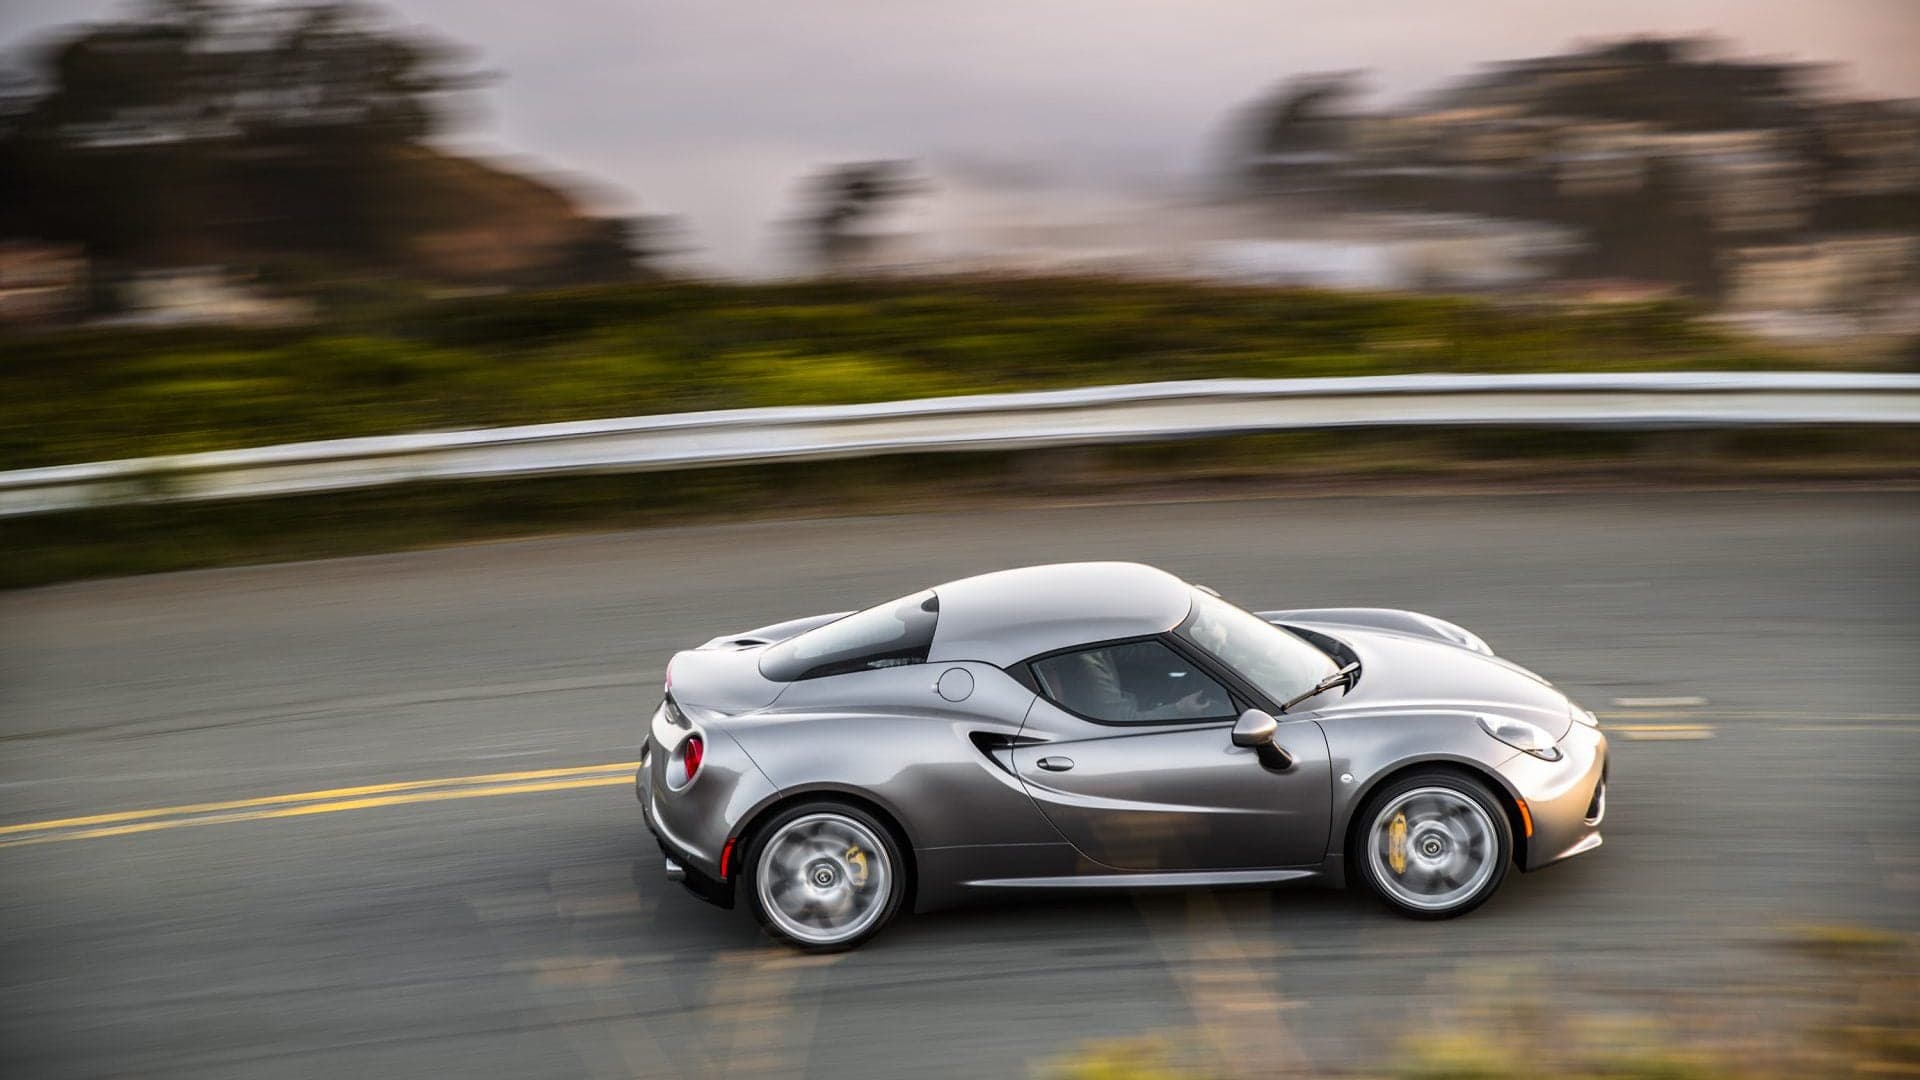 Alfa Romeo 4C Replacement in the Works, Won’t Get a Manual